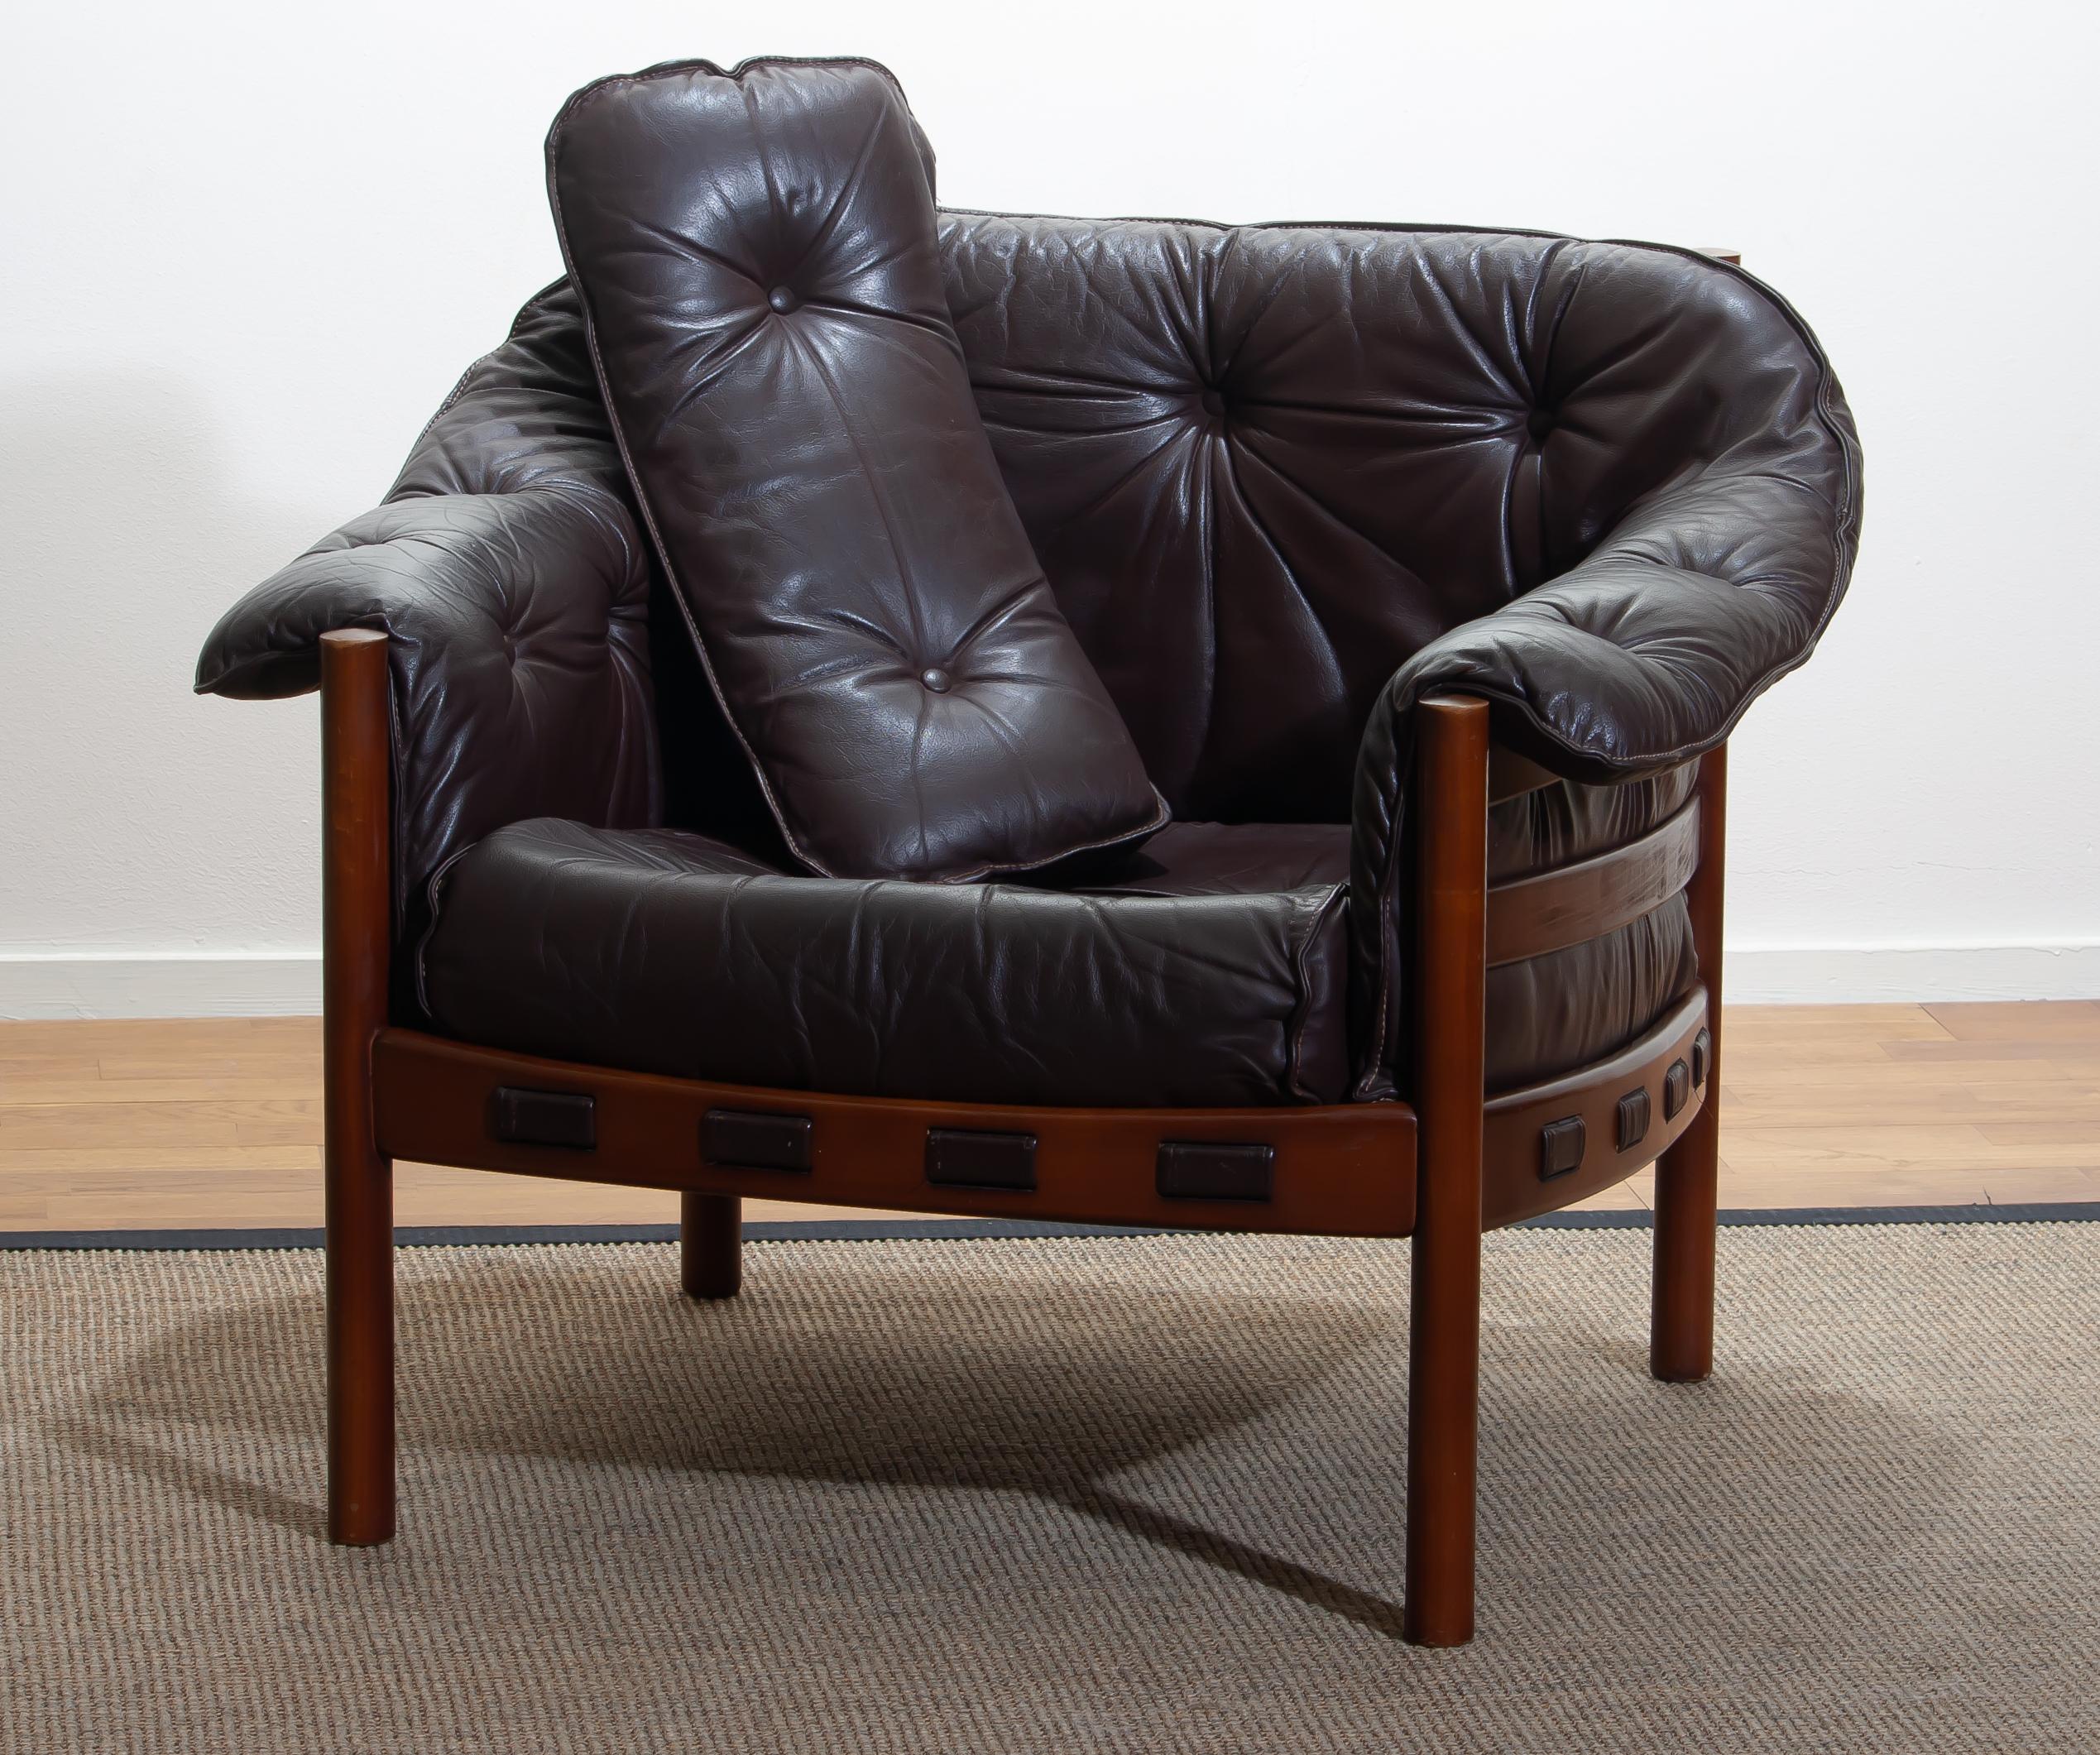 1960, Brown Leather And Lounge Chair by Arne Norell for Coja Sweden In Good Condition In Silvolde, Gelderland